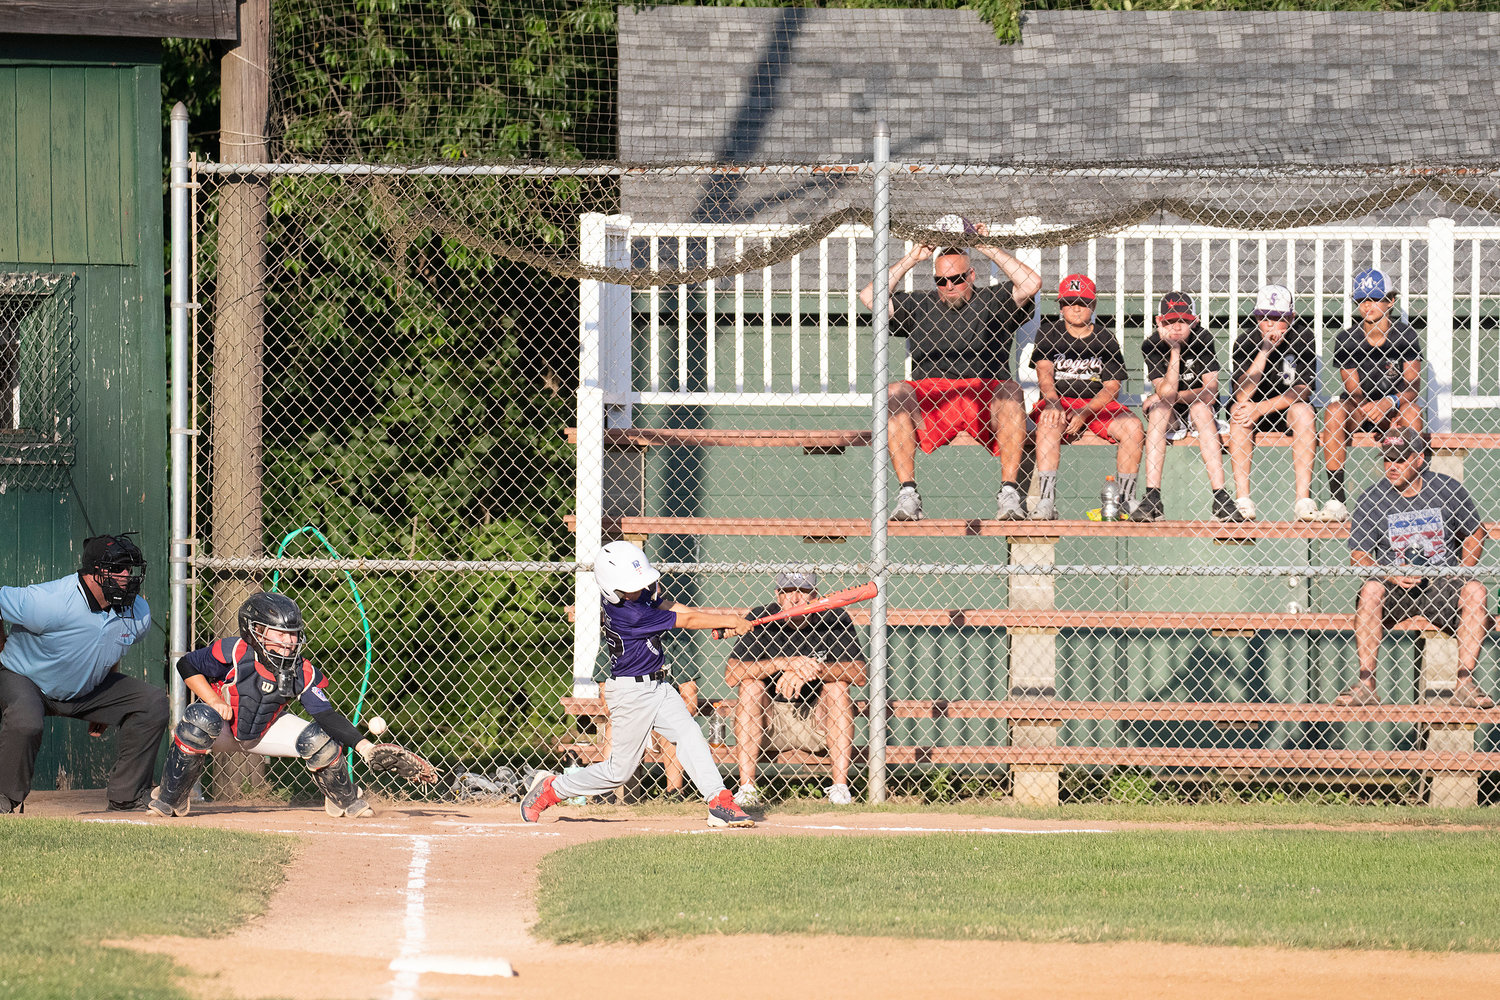 Fans react as pinch hitter Dylan Cote Swings at a pitch by Ben Humm. Catcher Ryan Campion is (left).